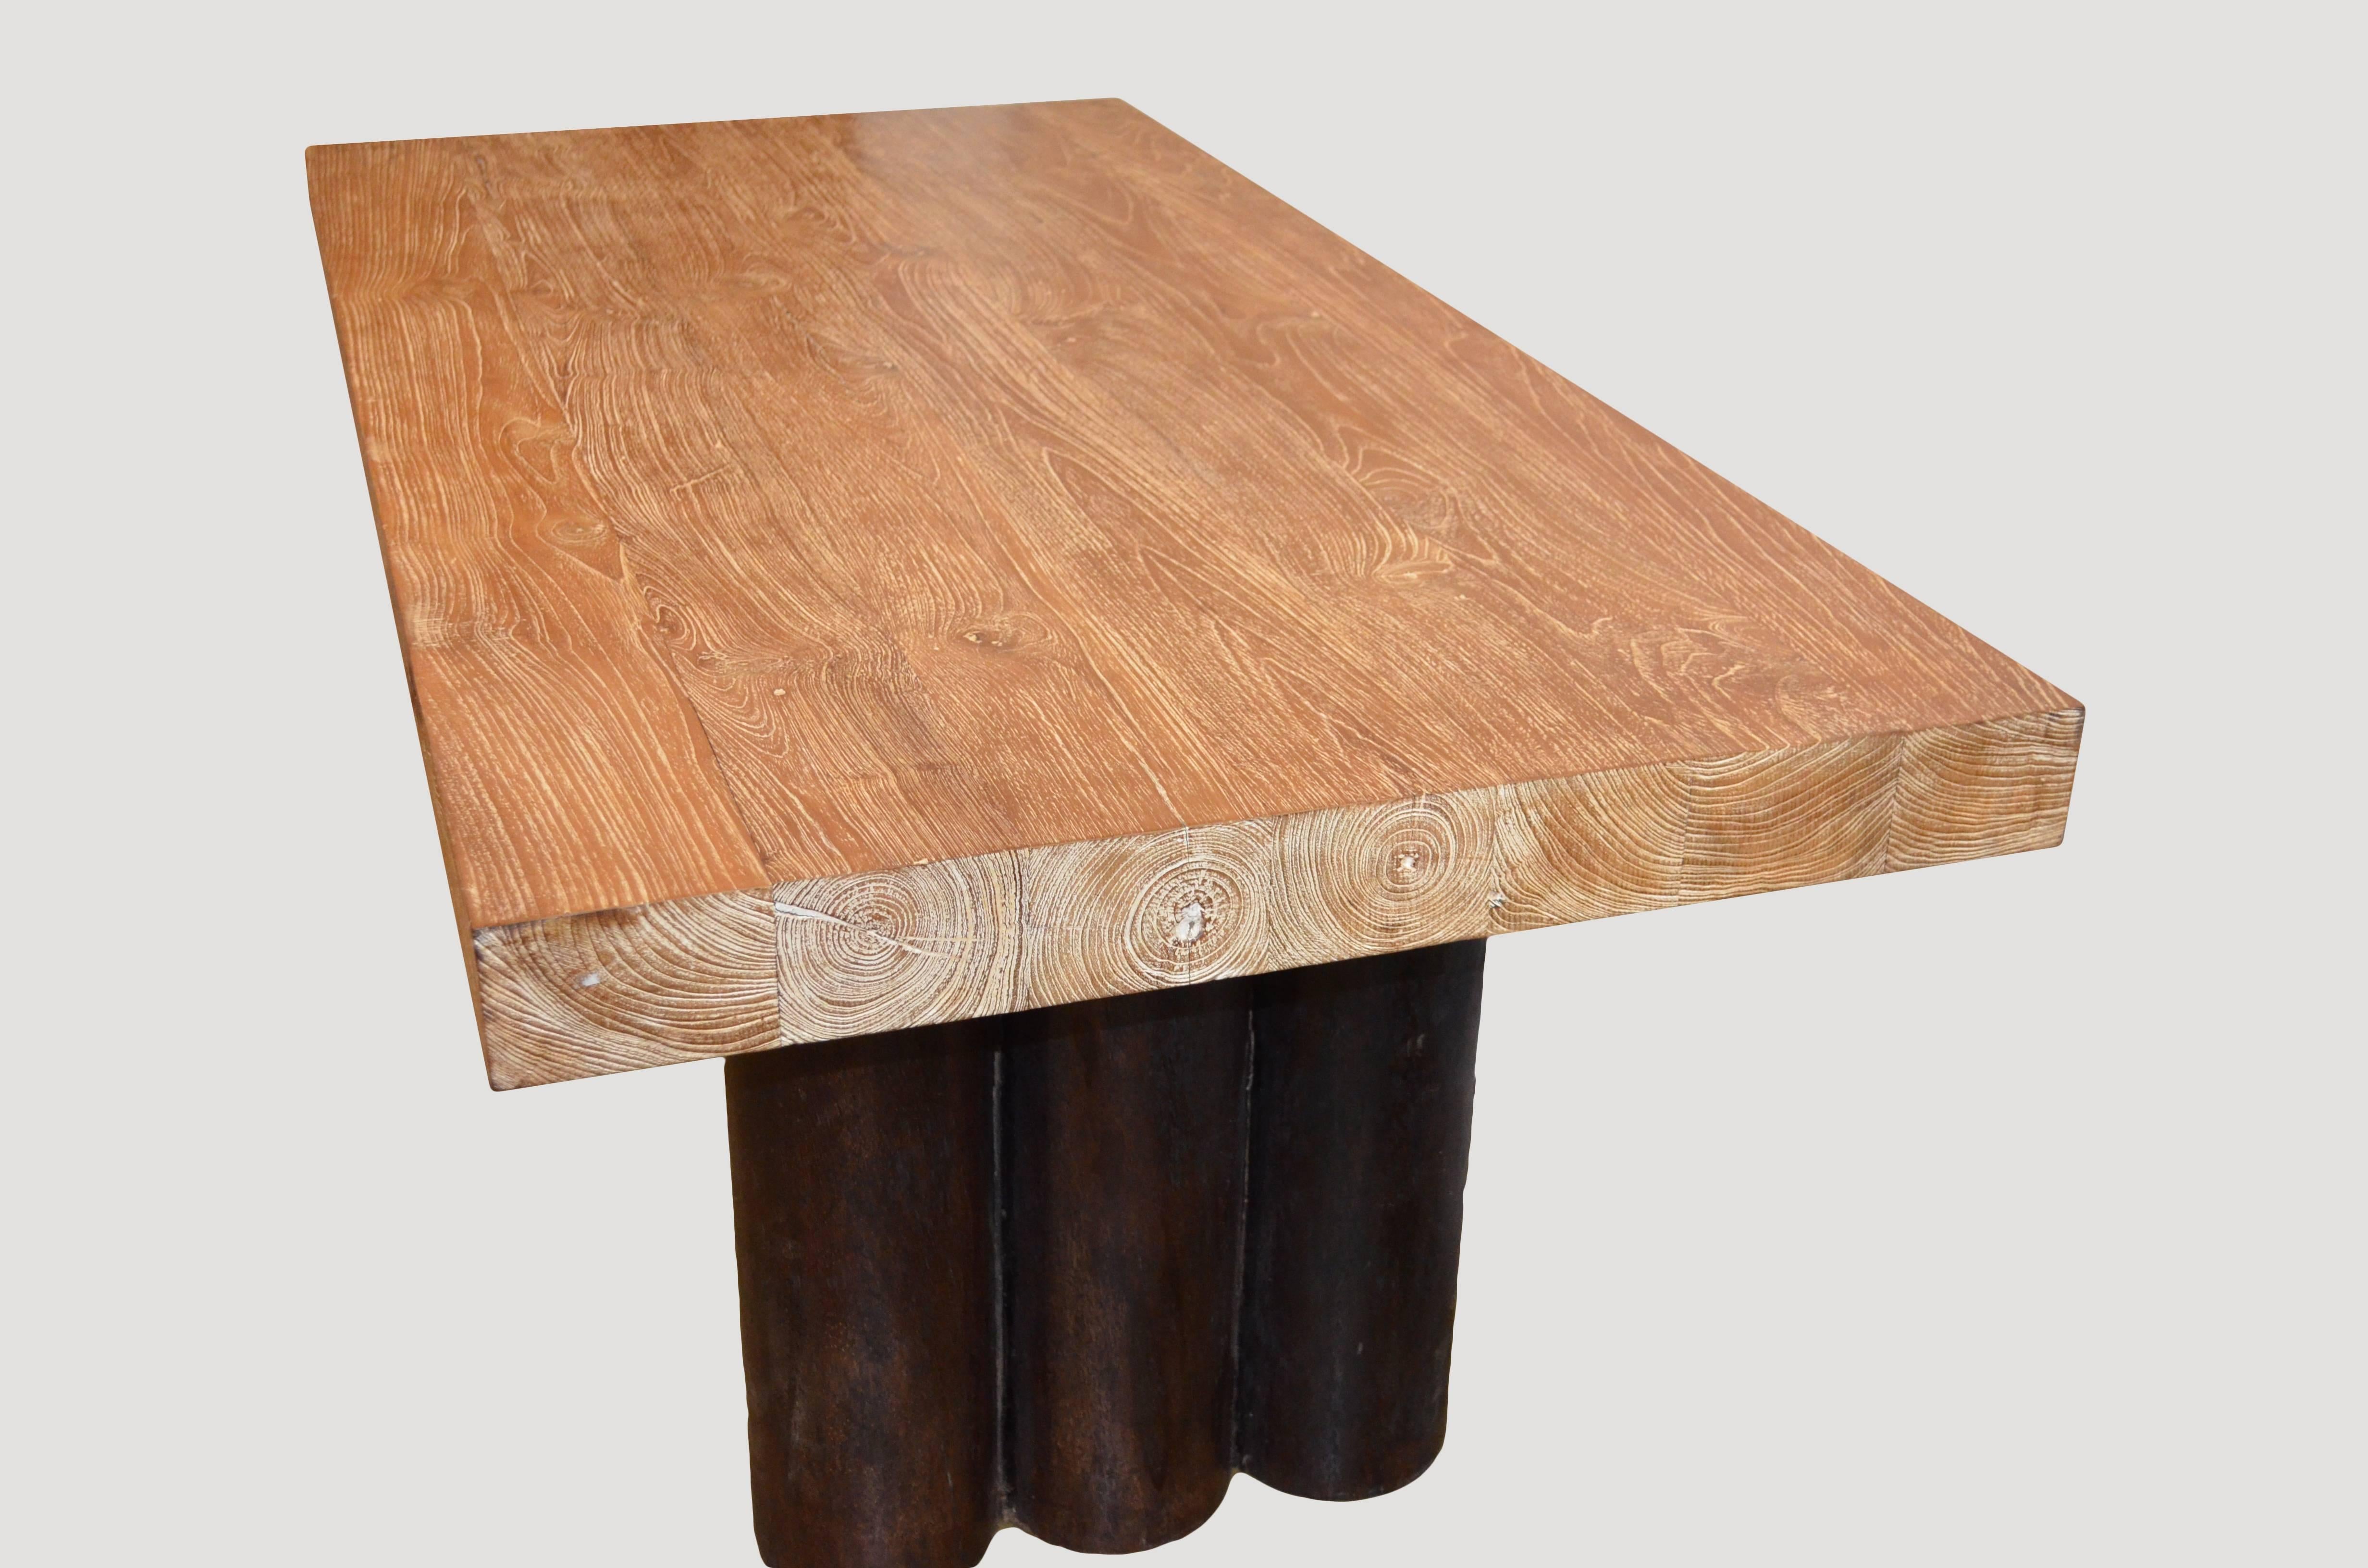 This four inch thick teak cerused top rests on a contrasting hollowed out coconut base stained espresso.

Own an Andrianna Shamaris original.

Andrianna Shamaris. The Leader In Modern Organic Design™